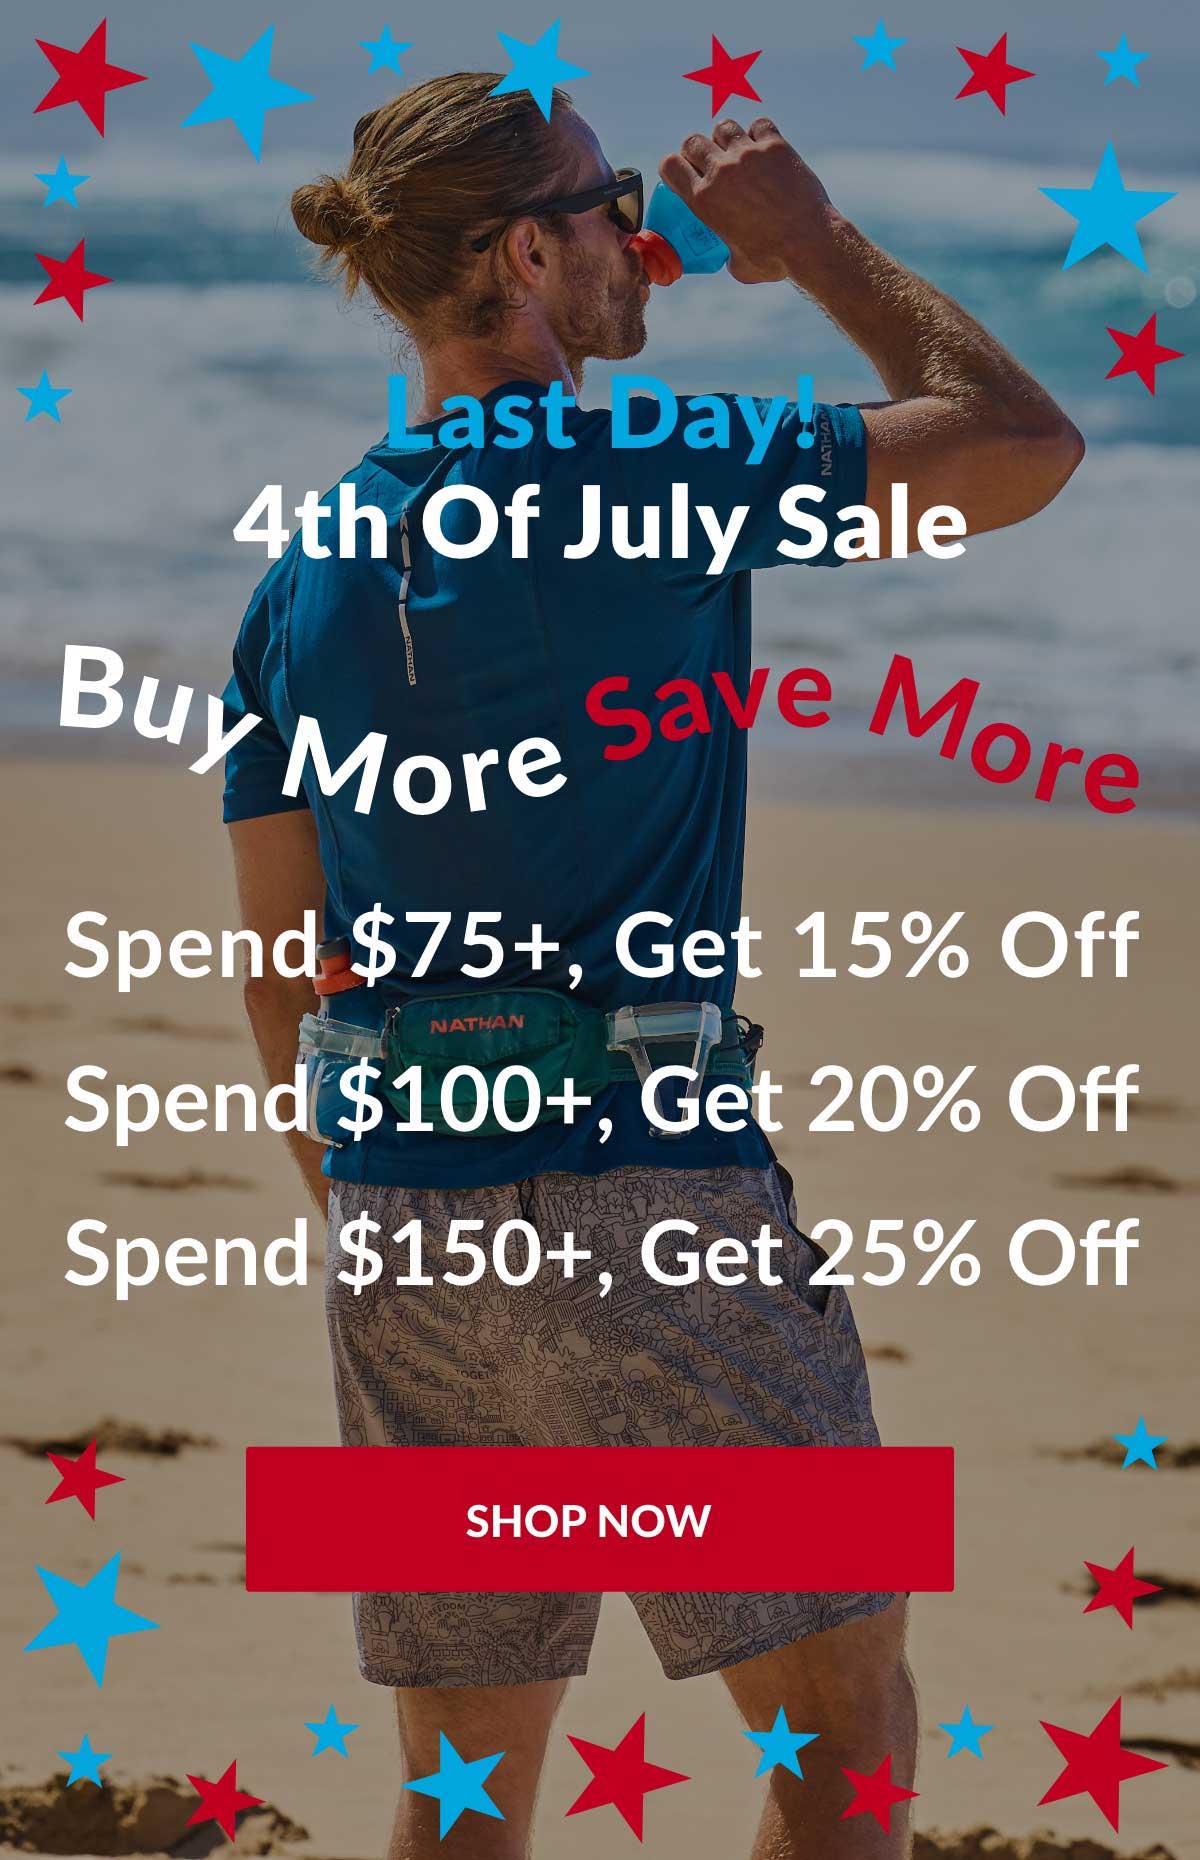 Last Day! 4th of July Sale - Buy More Save More - Spend $75+, Get 15% Off, Spend $100+, Get 20% Off, Spend $150+, Get 25% Off - Shop Now